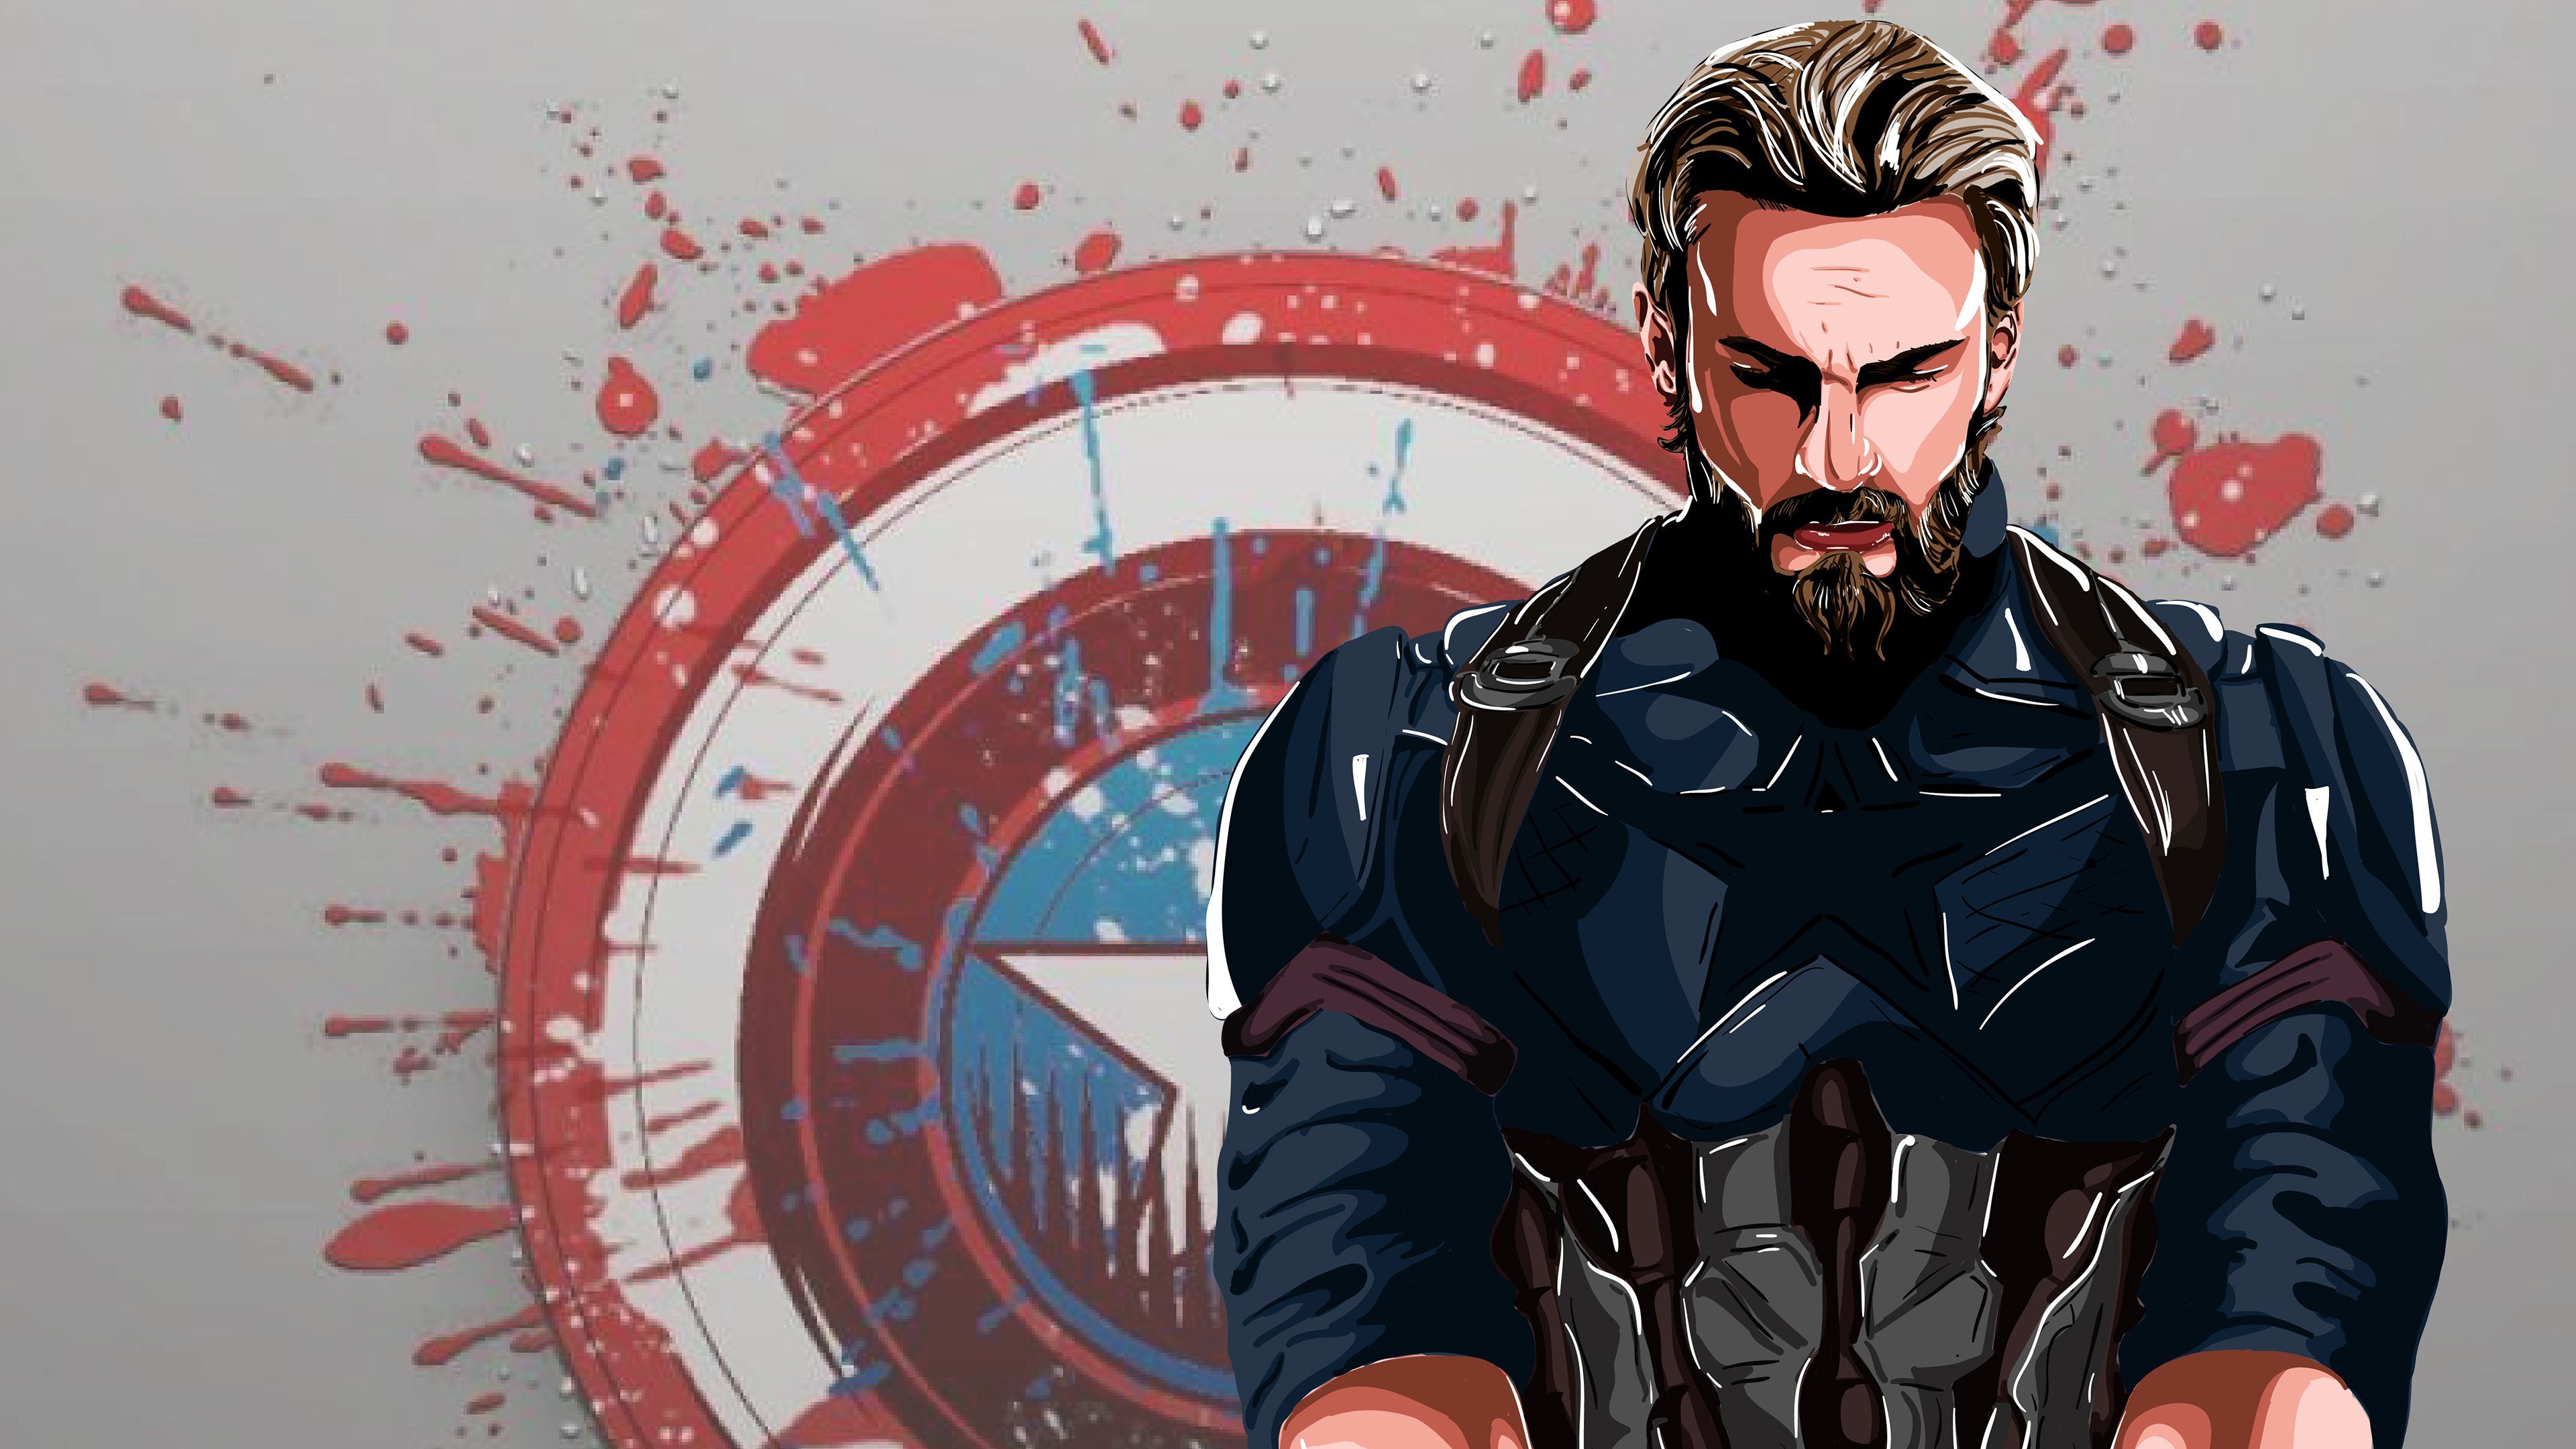 HD image of Captain America standing heroically